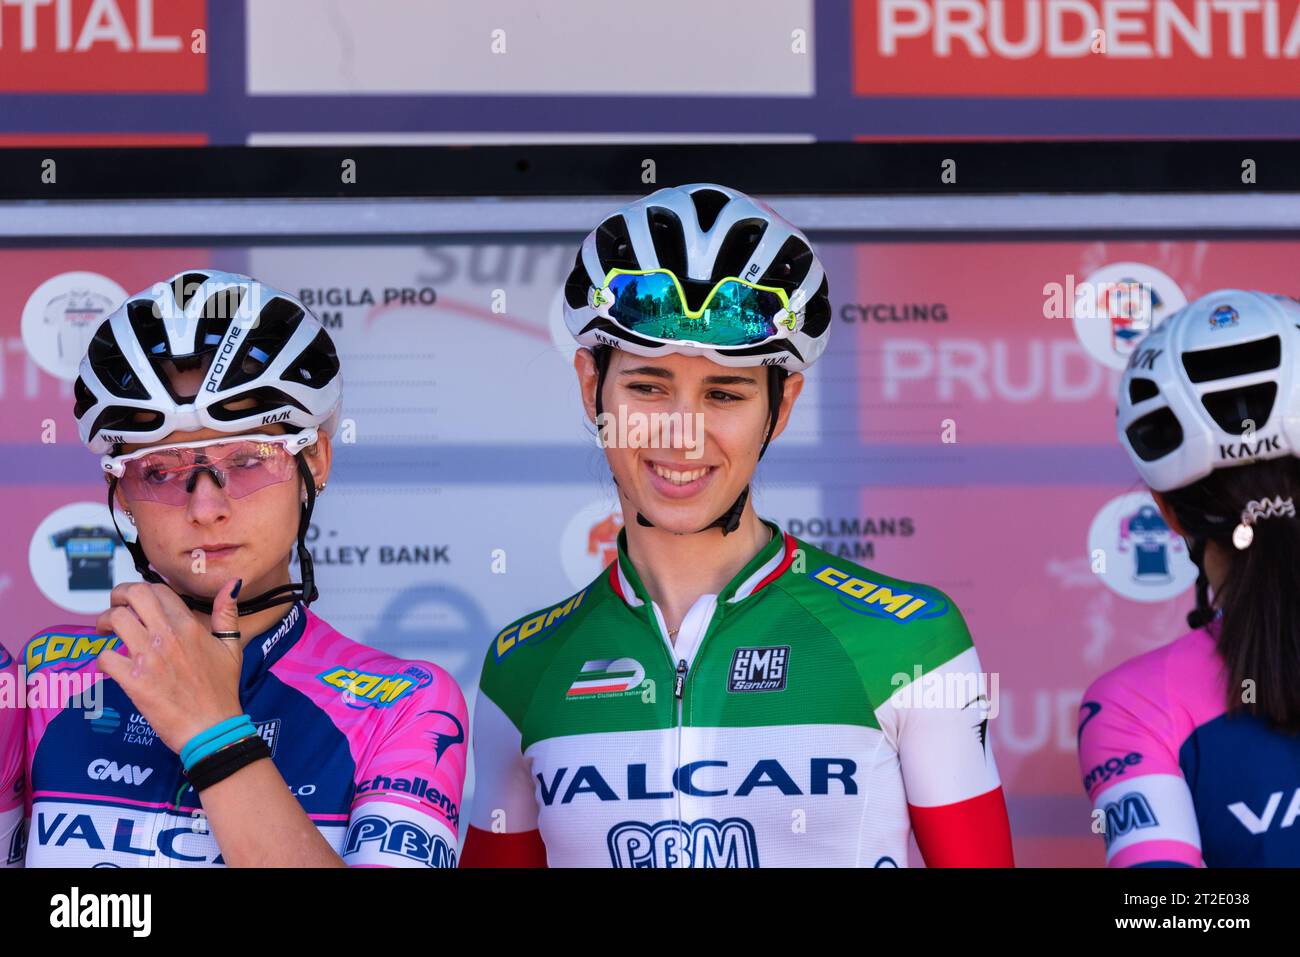 Marta Cavalli of Italy before riding for Valcar PBM at Prudential RideLondon Classique women's cycle race, London, UK. National jersey Stock Photo